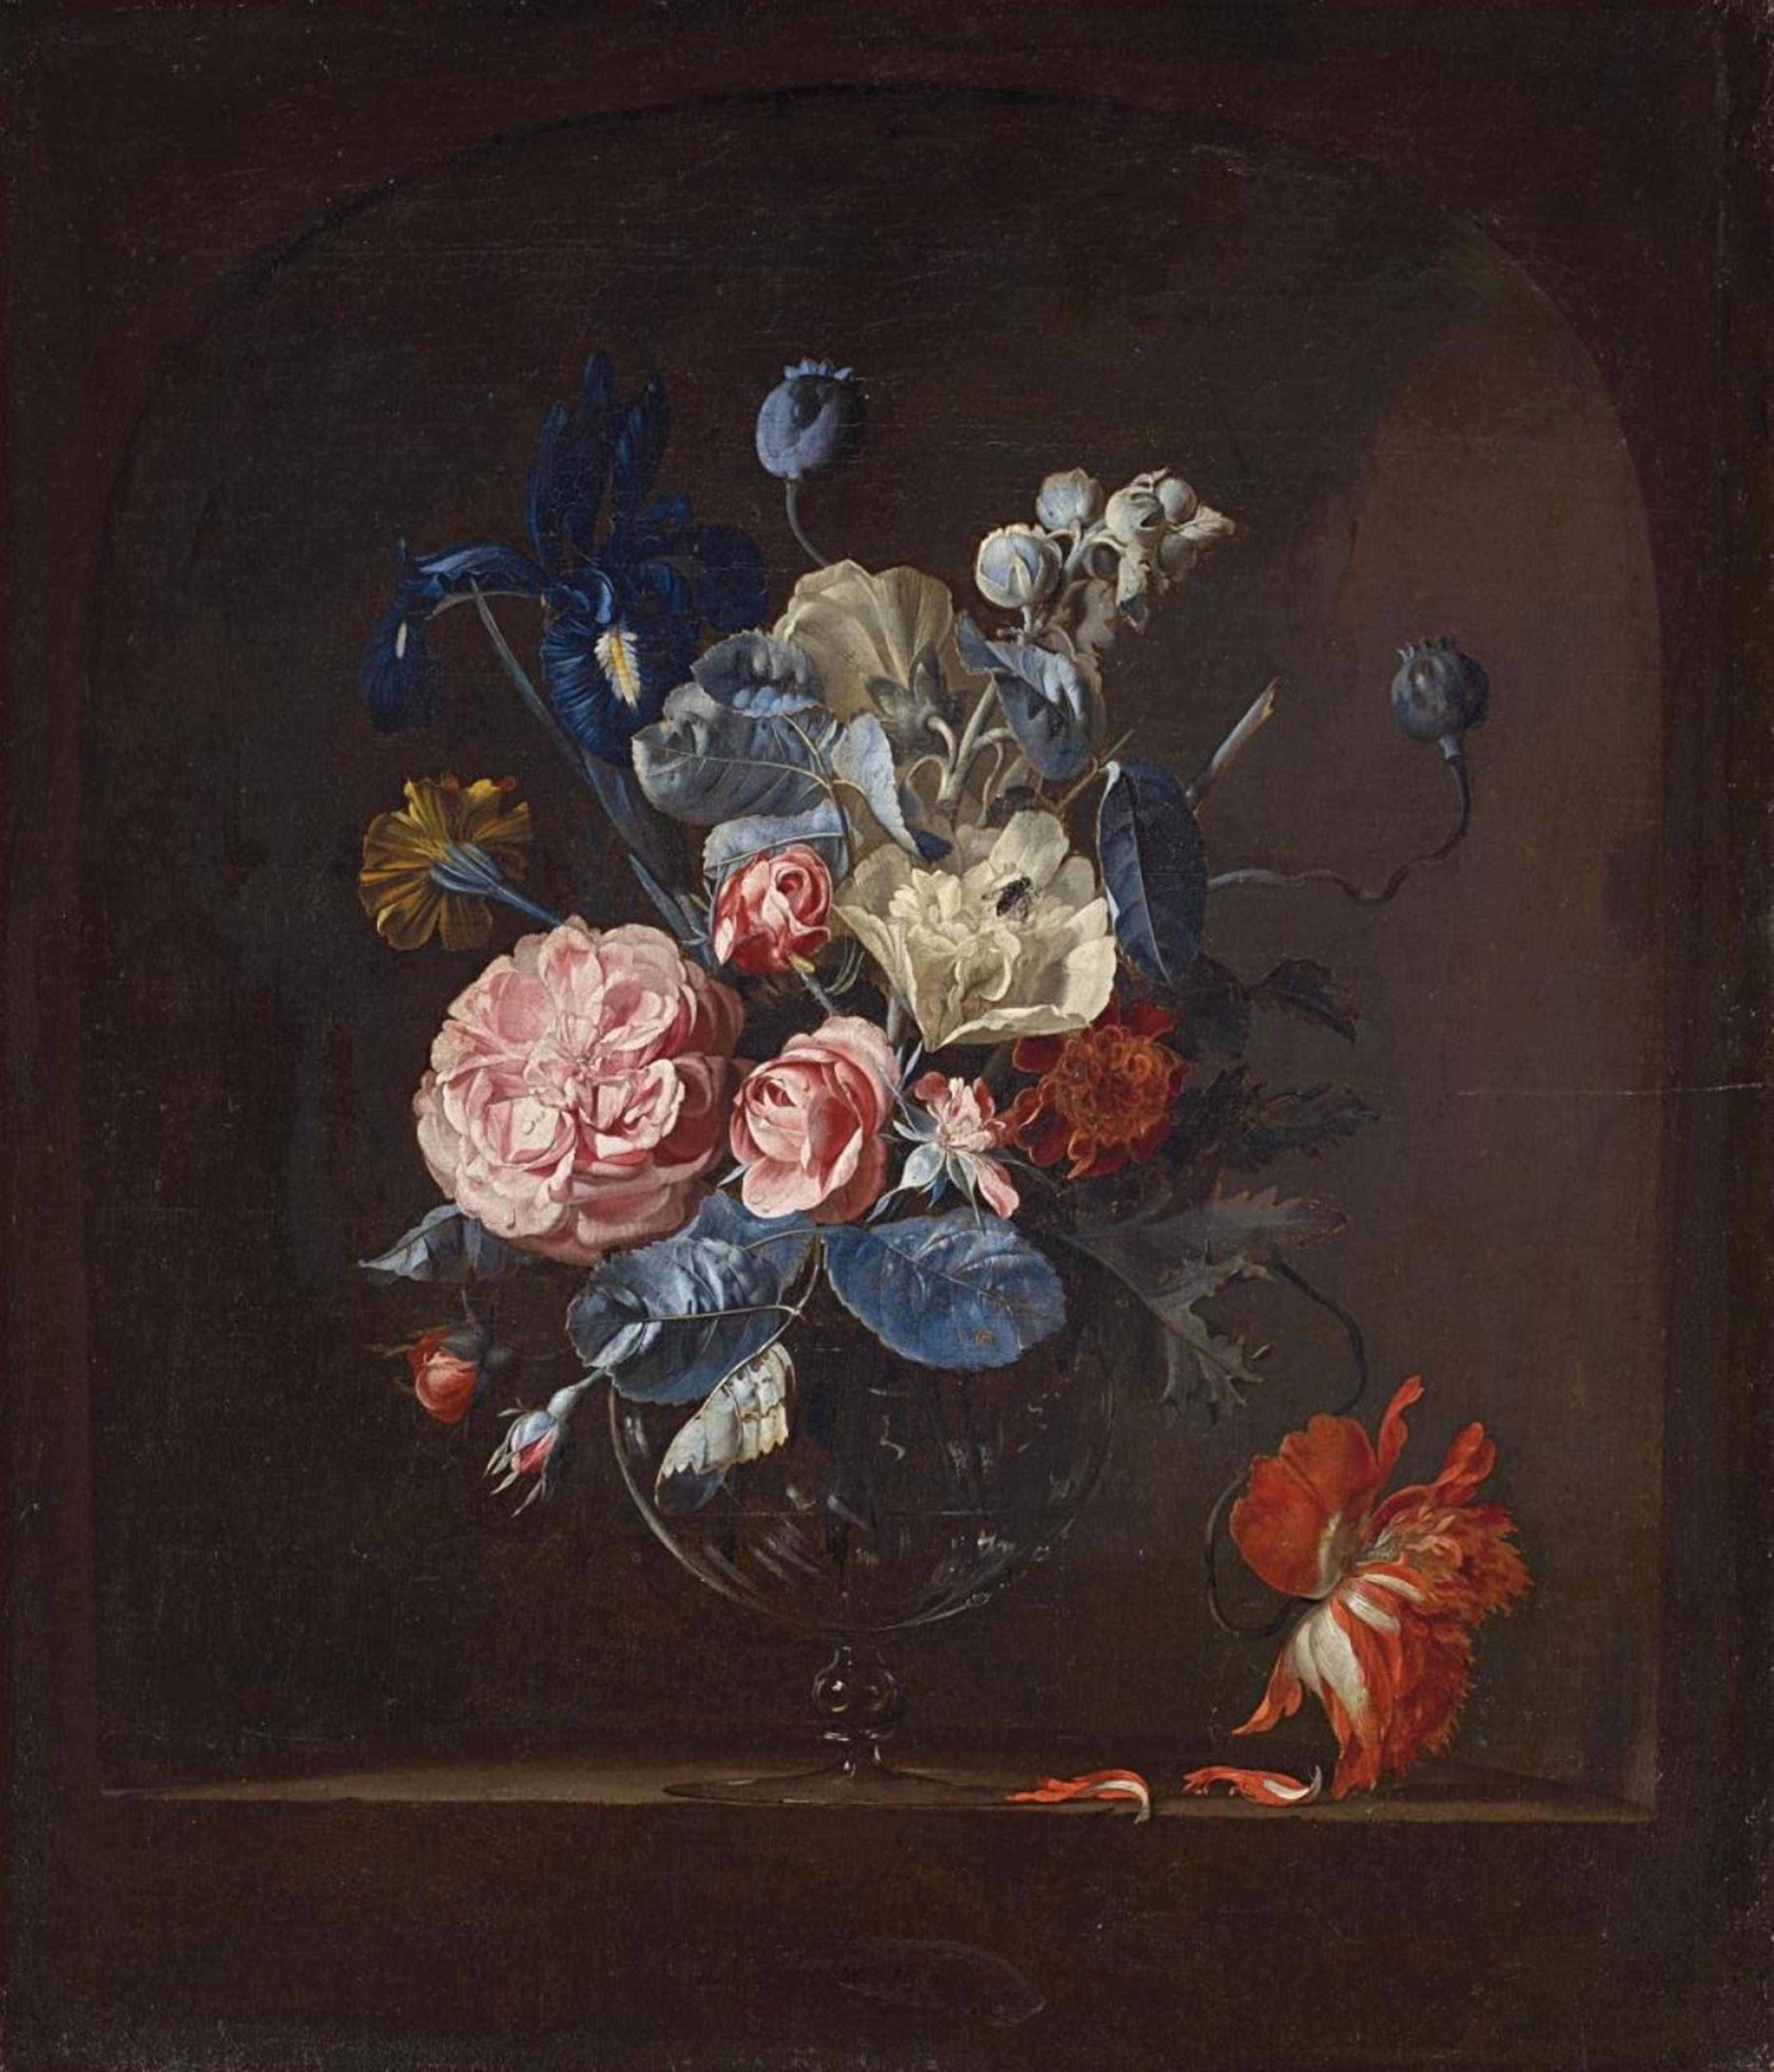 Willem van Aelst - Glass Vase with Roses, Iris, Marigolds, and Tulips in a Niche - image-1